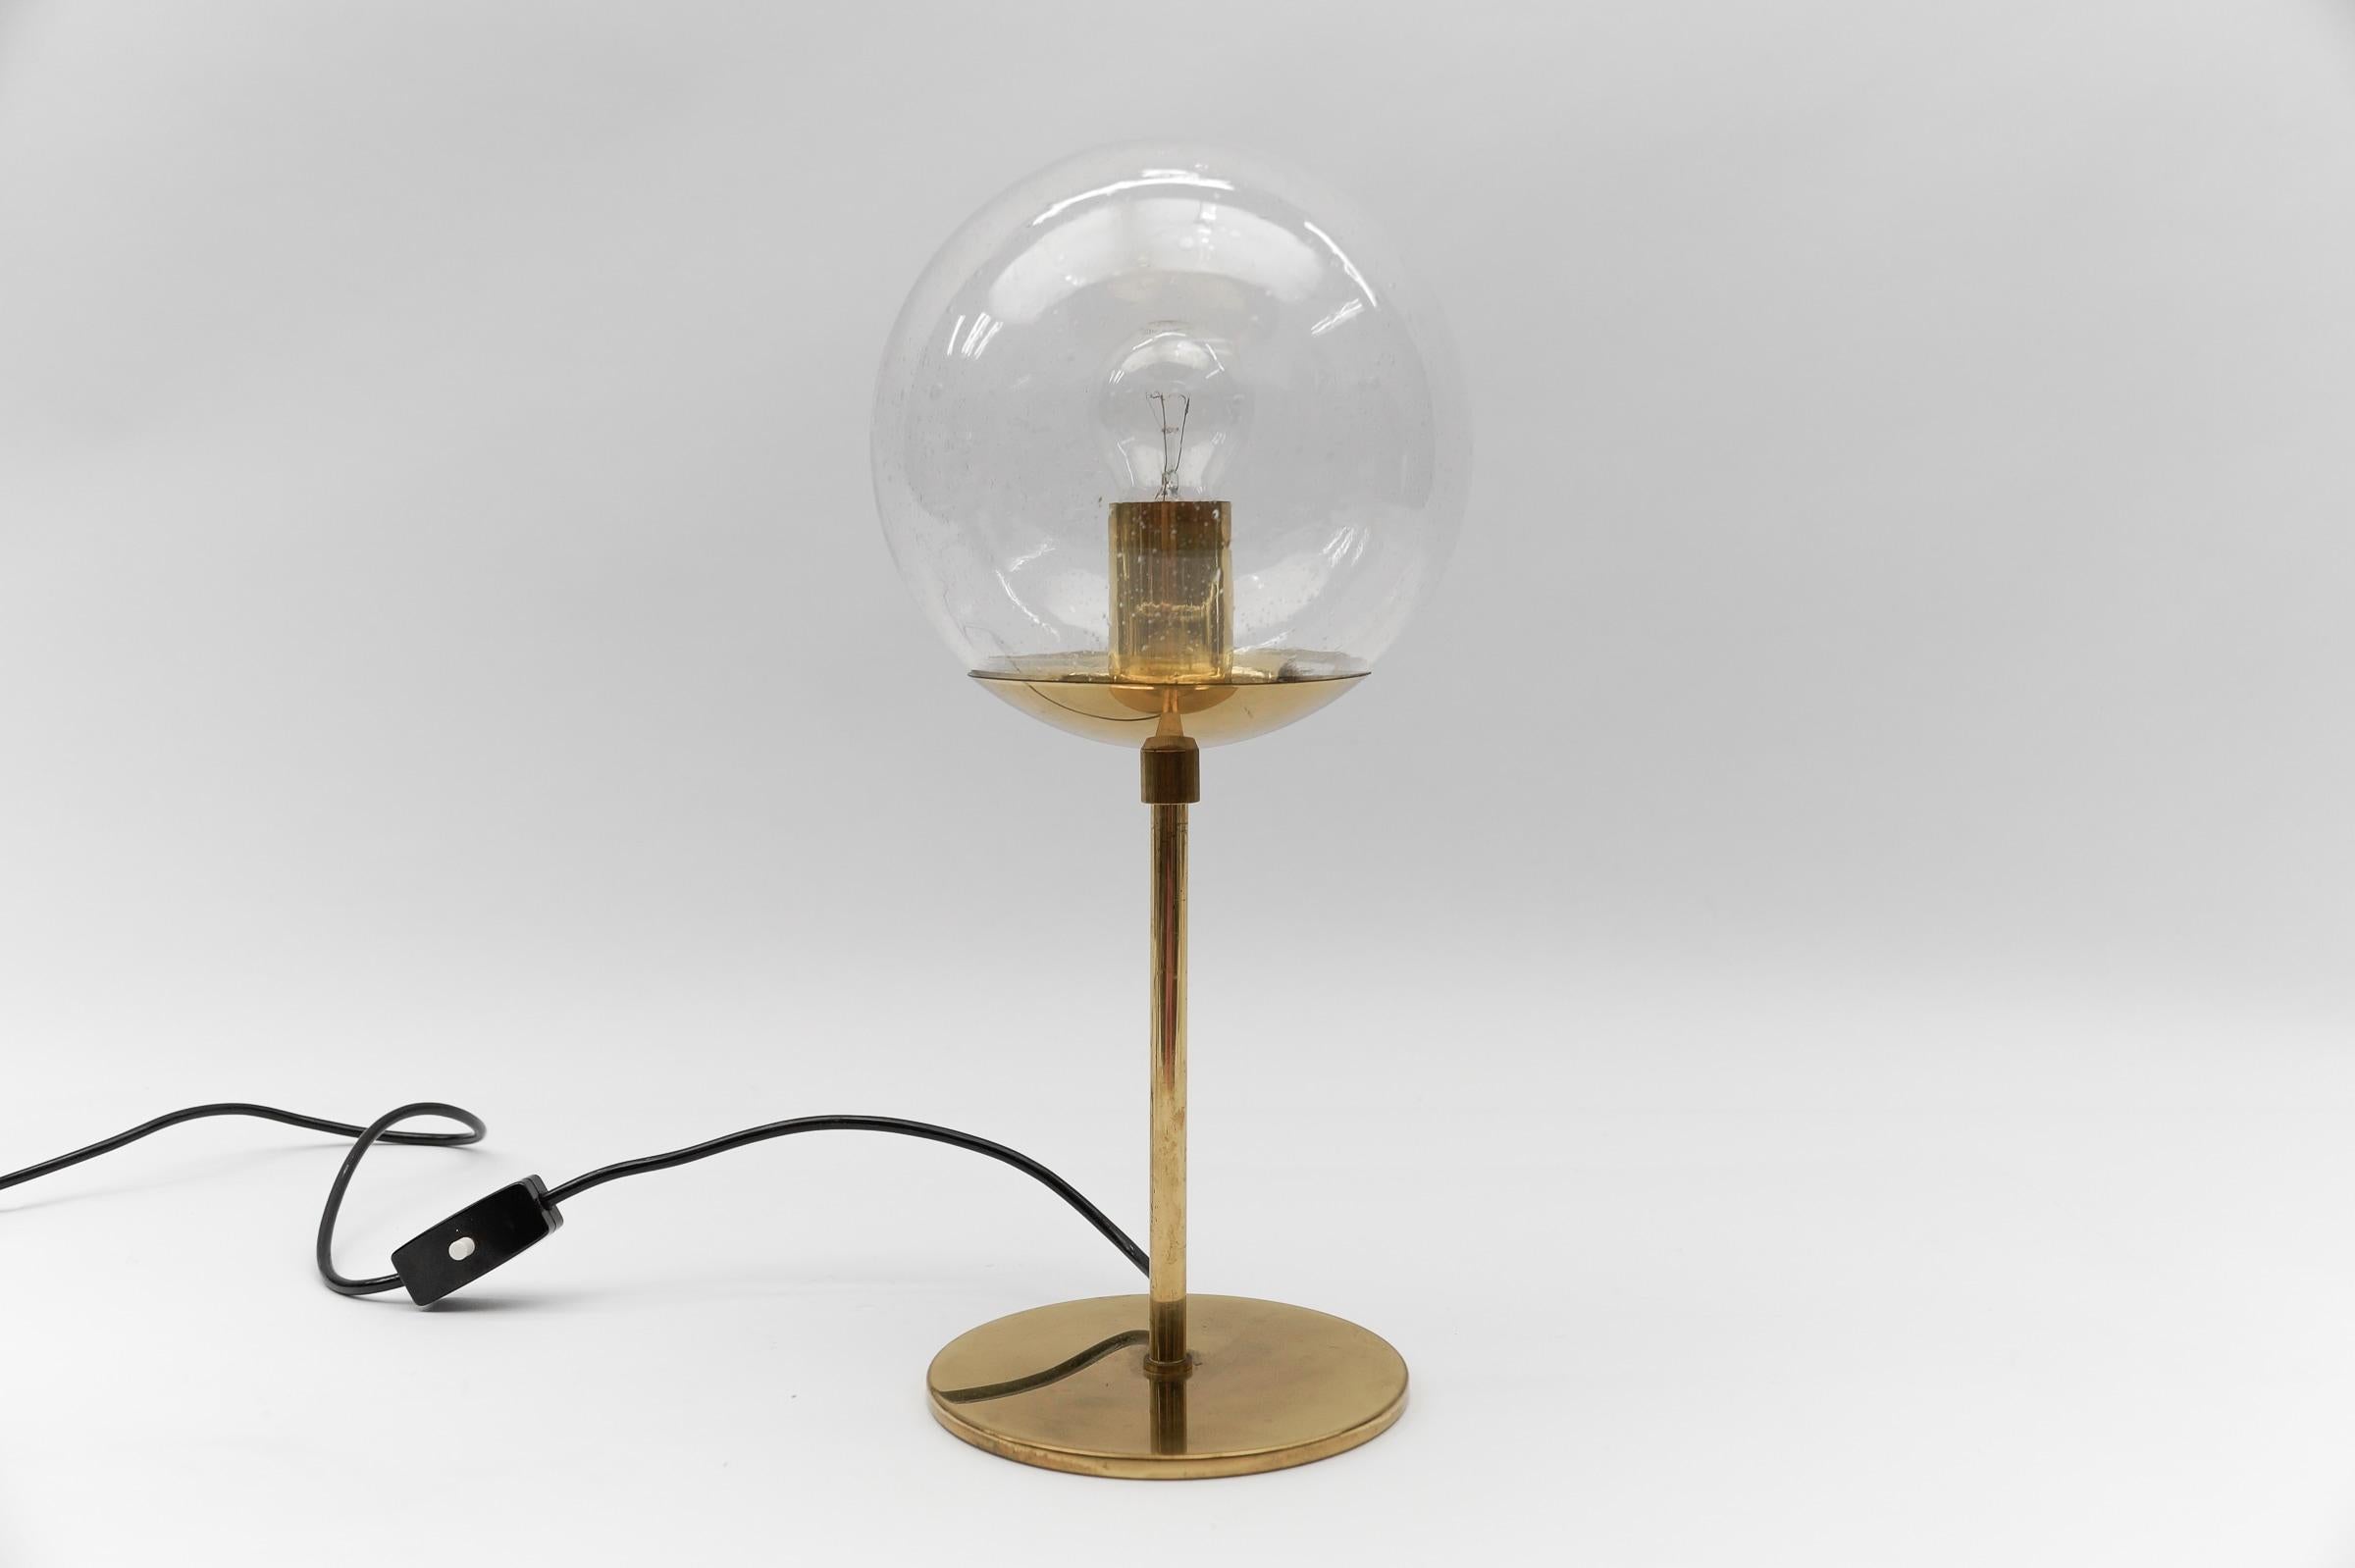 Mid-Century Modern Table Lamp made in Brass and Glass, 1960s

Dimension
Height: 16.92 in (43 cm)
Diameter: 7.87 in (20 cm)

The lamp needs 1 x E27 / E26 Edison screw fit bulb, is wired, and in working condition. It runs both on 110 / 230 volt.

Very